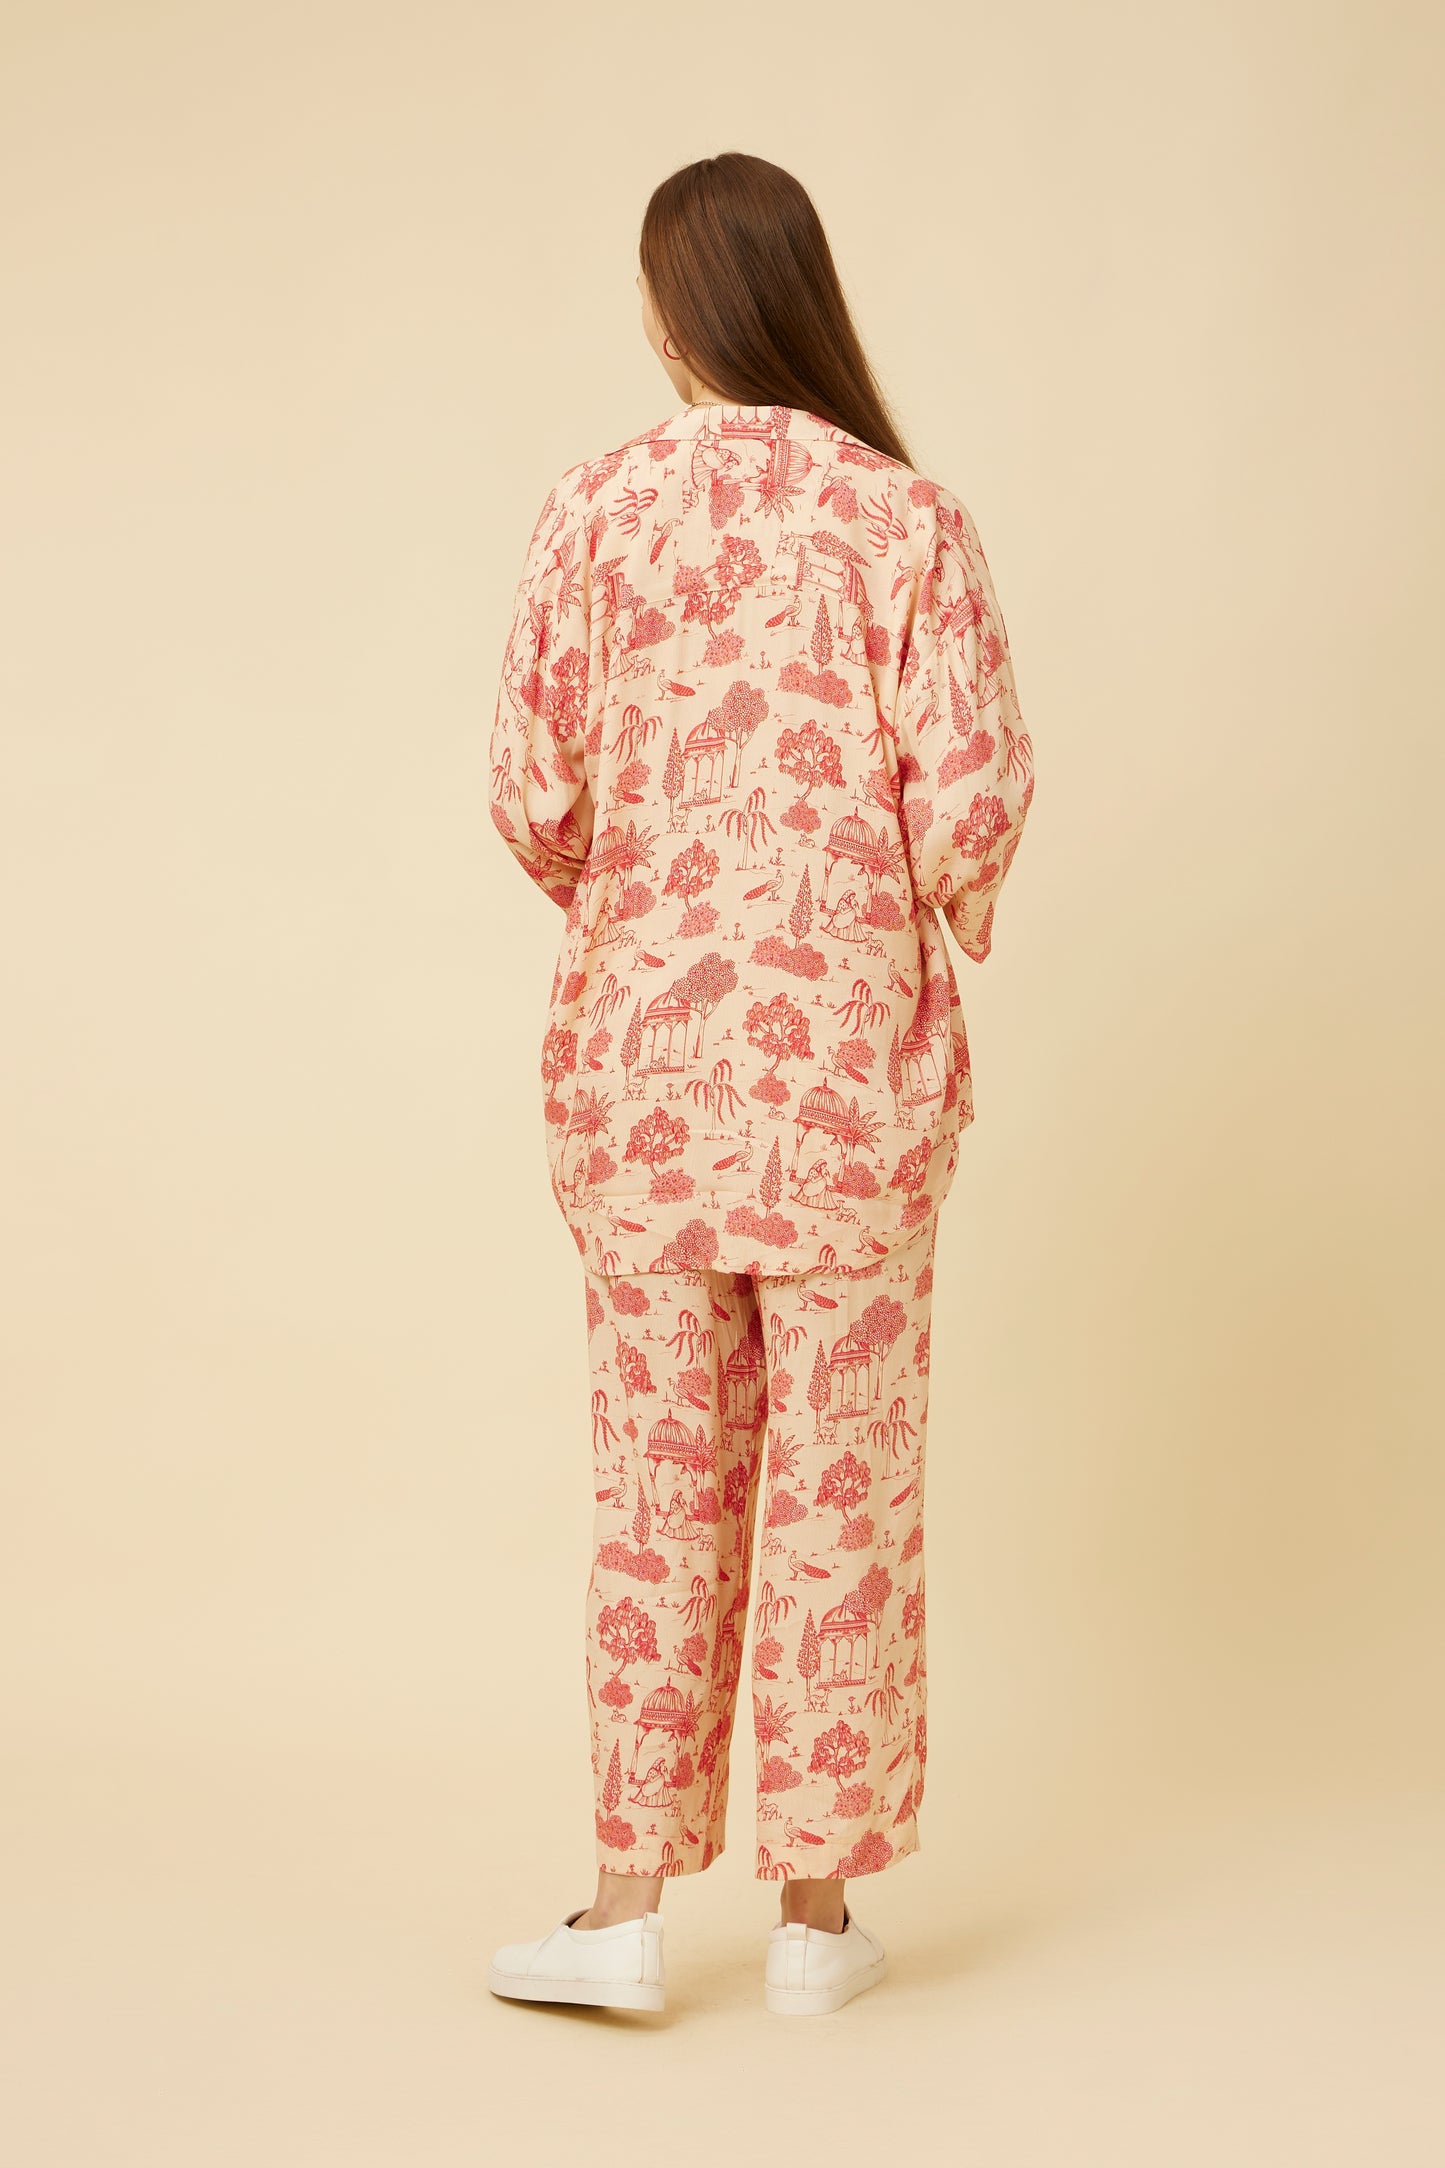 Rear view of the 'Jaipur Ki Rani' co-ord set highlighting the back elastic of the loose pants and the natural flow of the unlined fabric, with practical pockets for comfort